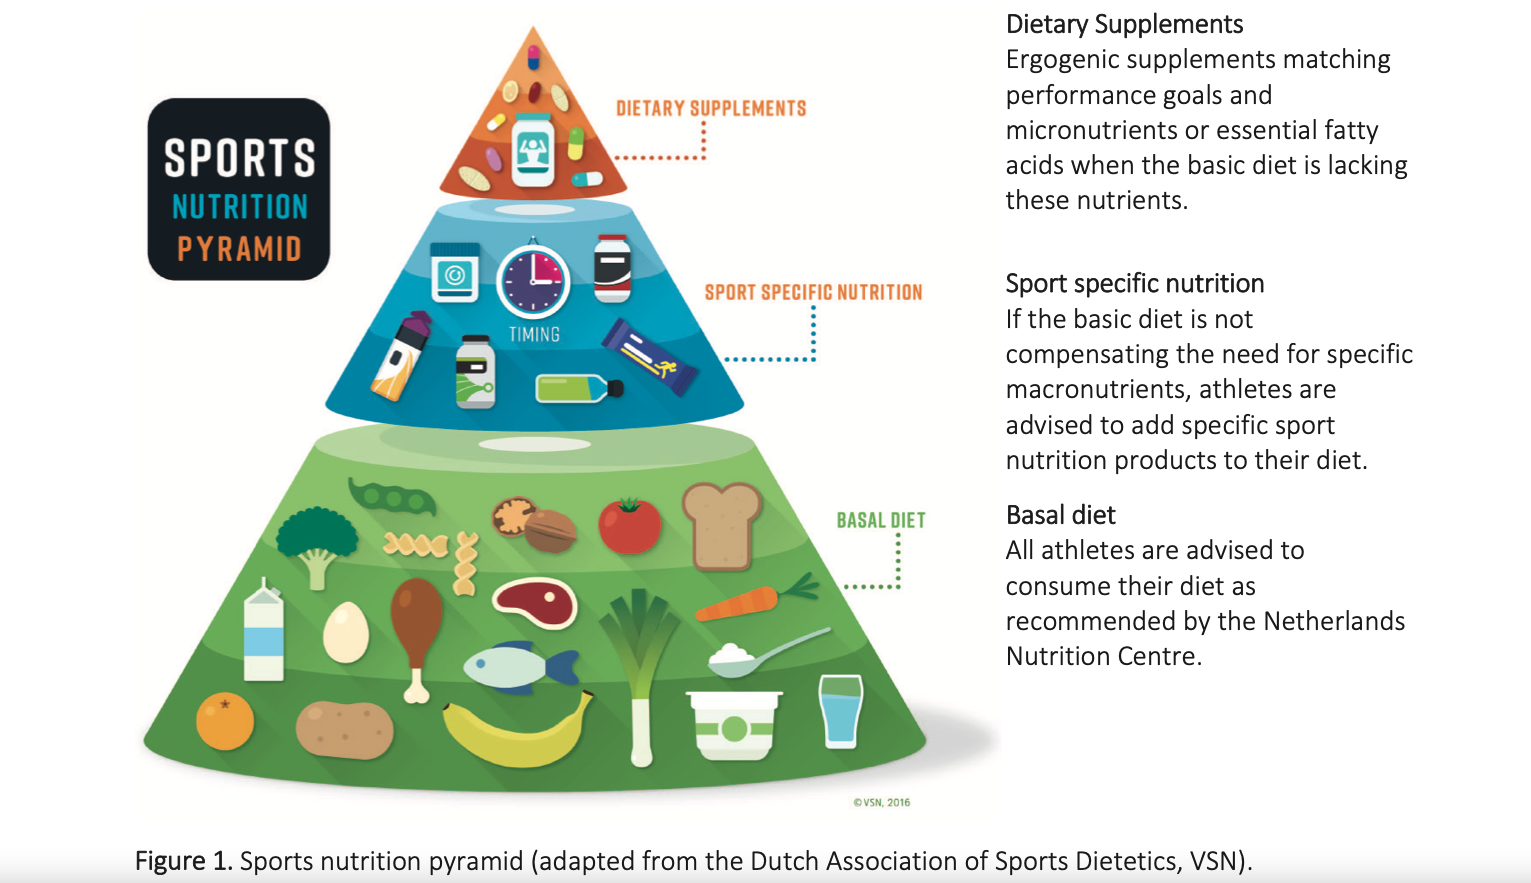 Wardenaar, Floris. Evaluation of dietary intake and nutritional supplements use of elite and sub-elite Durch athletes: Dutch Sport Nutrition and Supplement Study. Diss. Wageningen University and Research, 2017